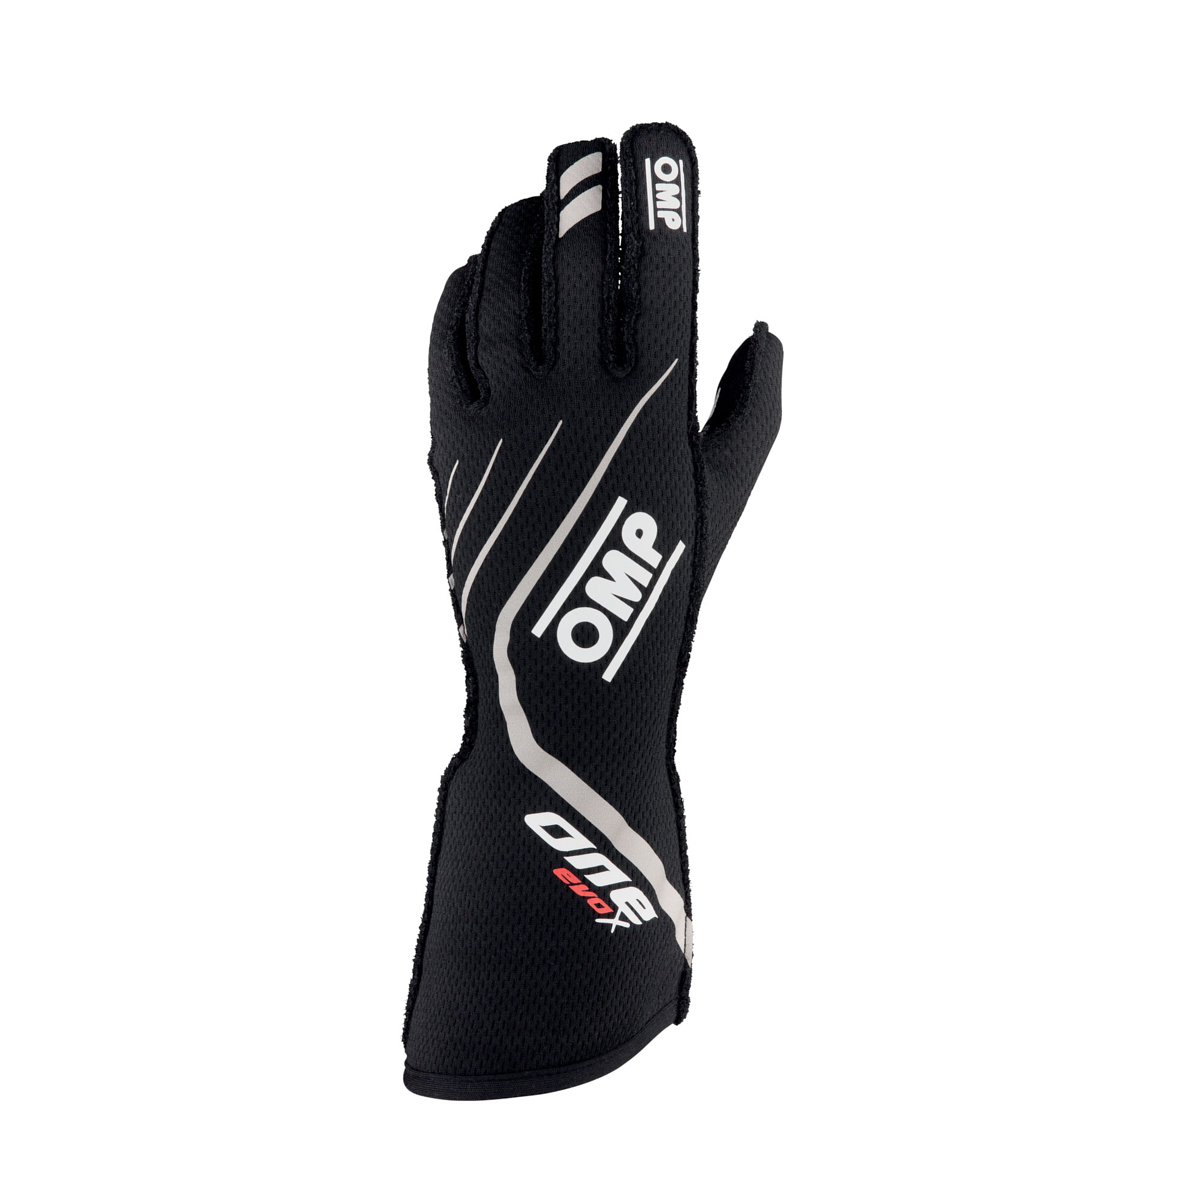 OMP Racing IB771NM Driving Gloves, One EVO X, FIA Approved, Double Layer, Fire Retardant Fabric, Black, Medium, Pair